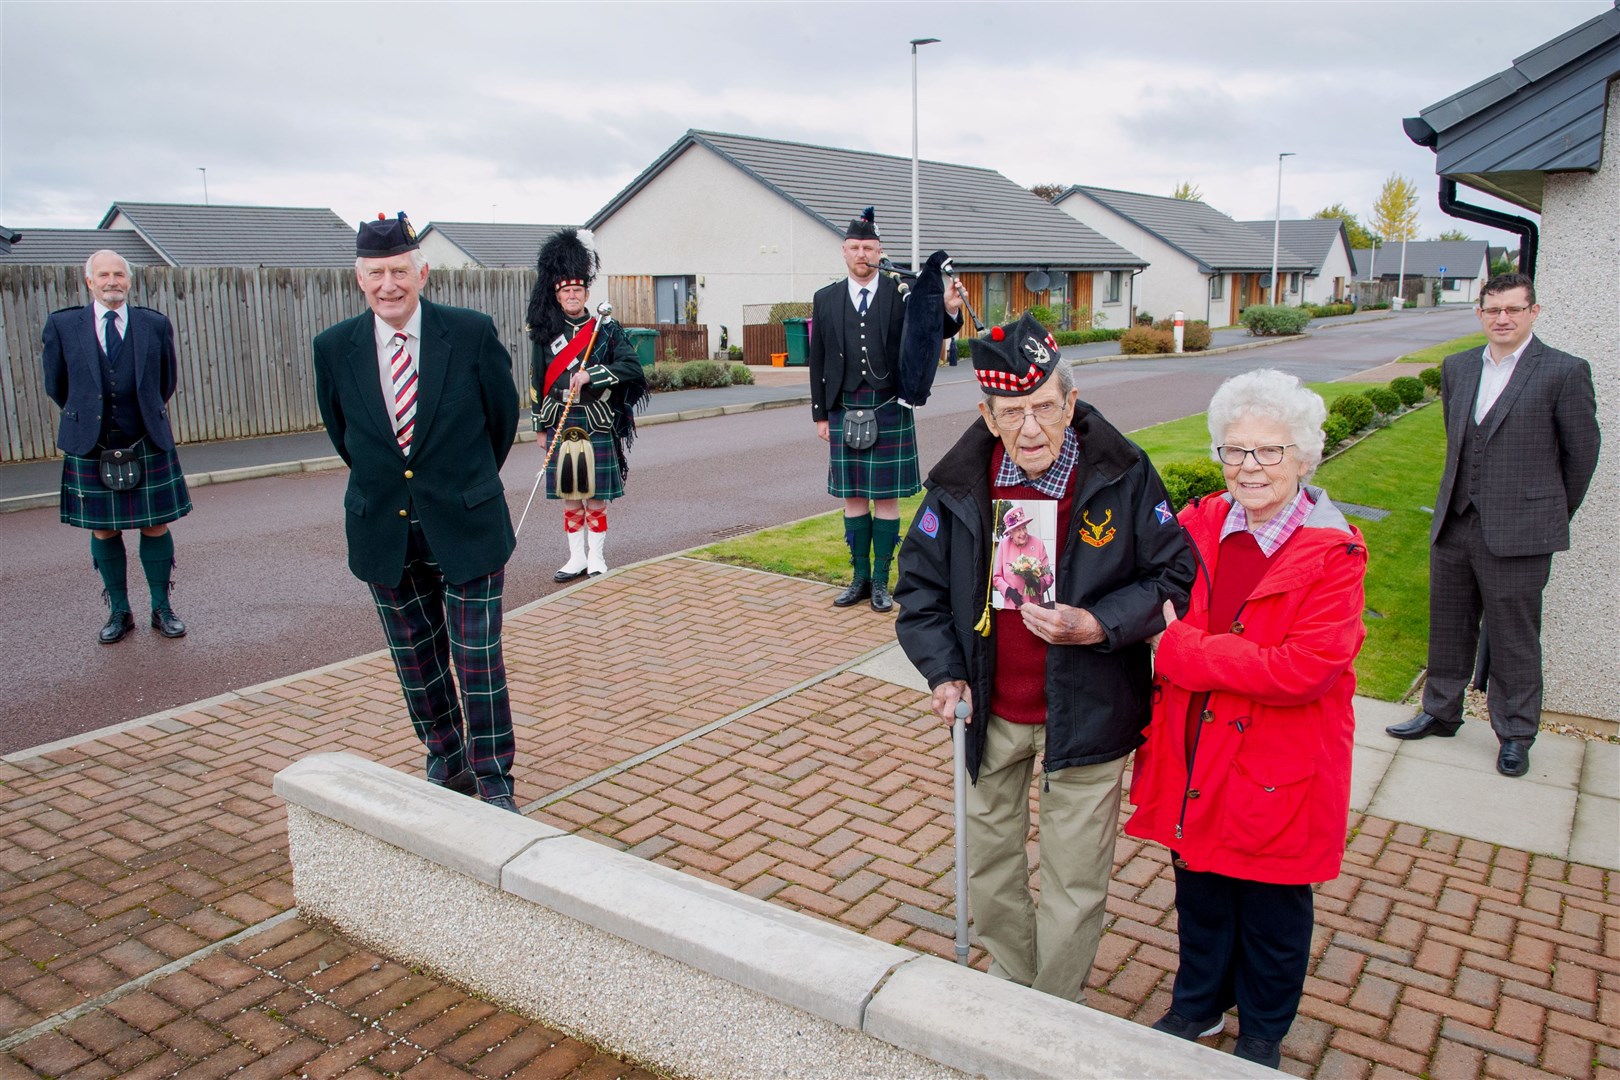 Forres Pipe band chairman John Channon, Major General Seymour Monro CBE, drum major Mike Munro, pipe sergeant Johnathan Scott, Donald and Helen Smith, and Councillor Aaron McLean celebrating Don's 100th birthday on Macrae Court.